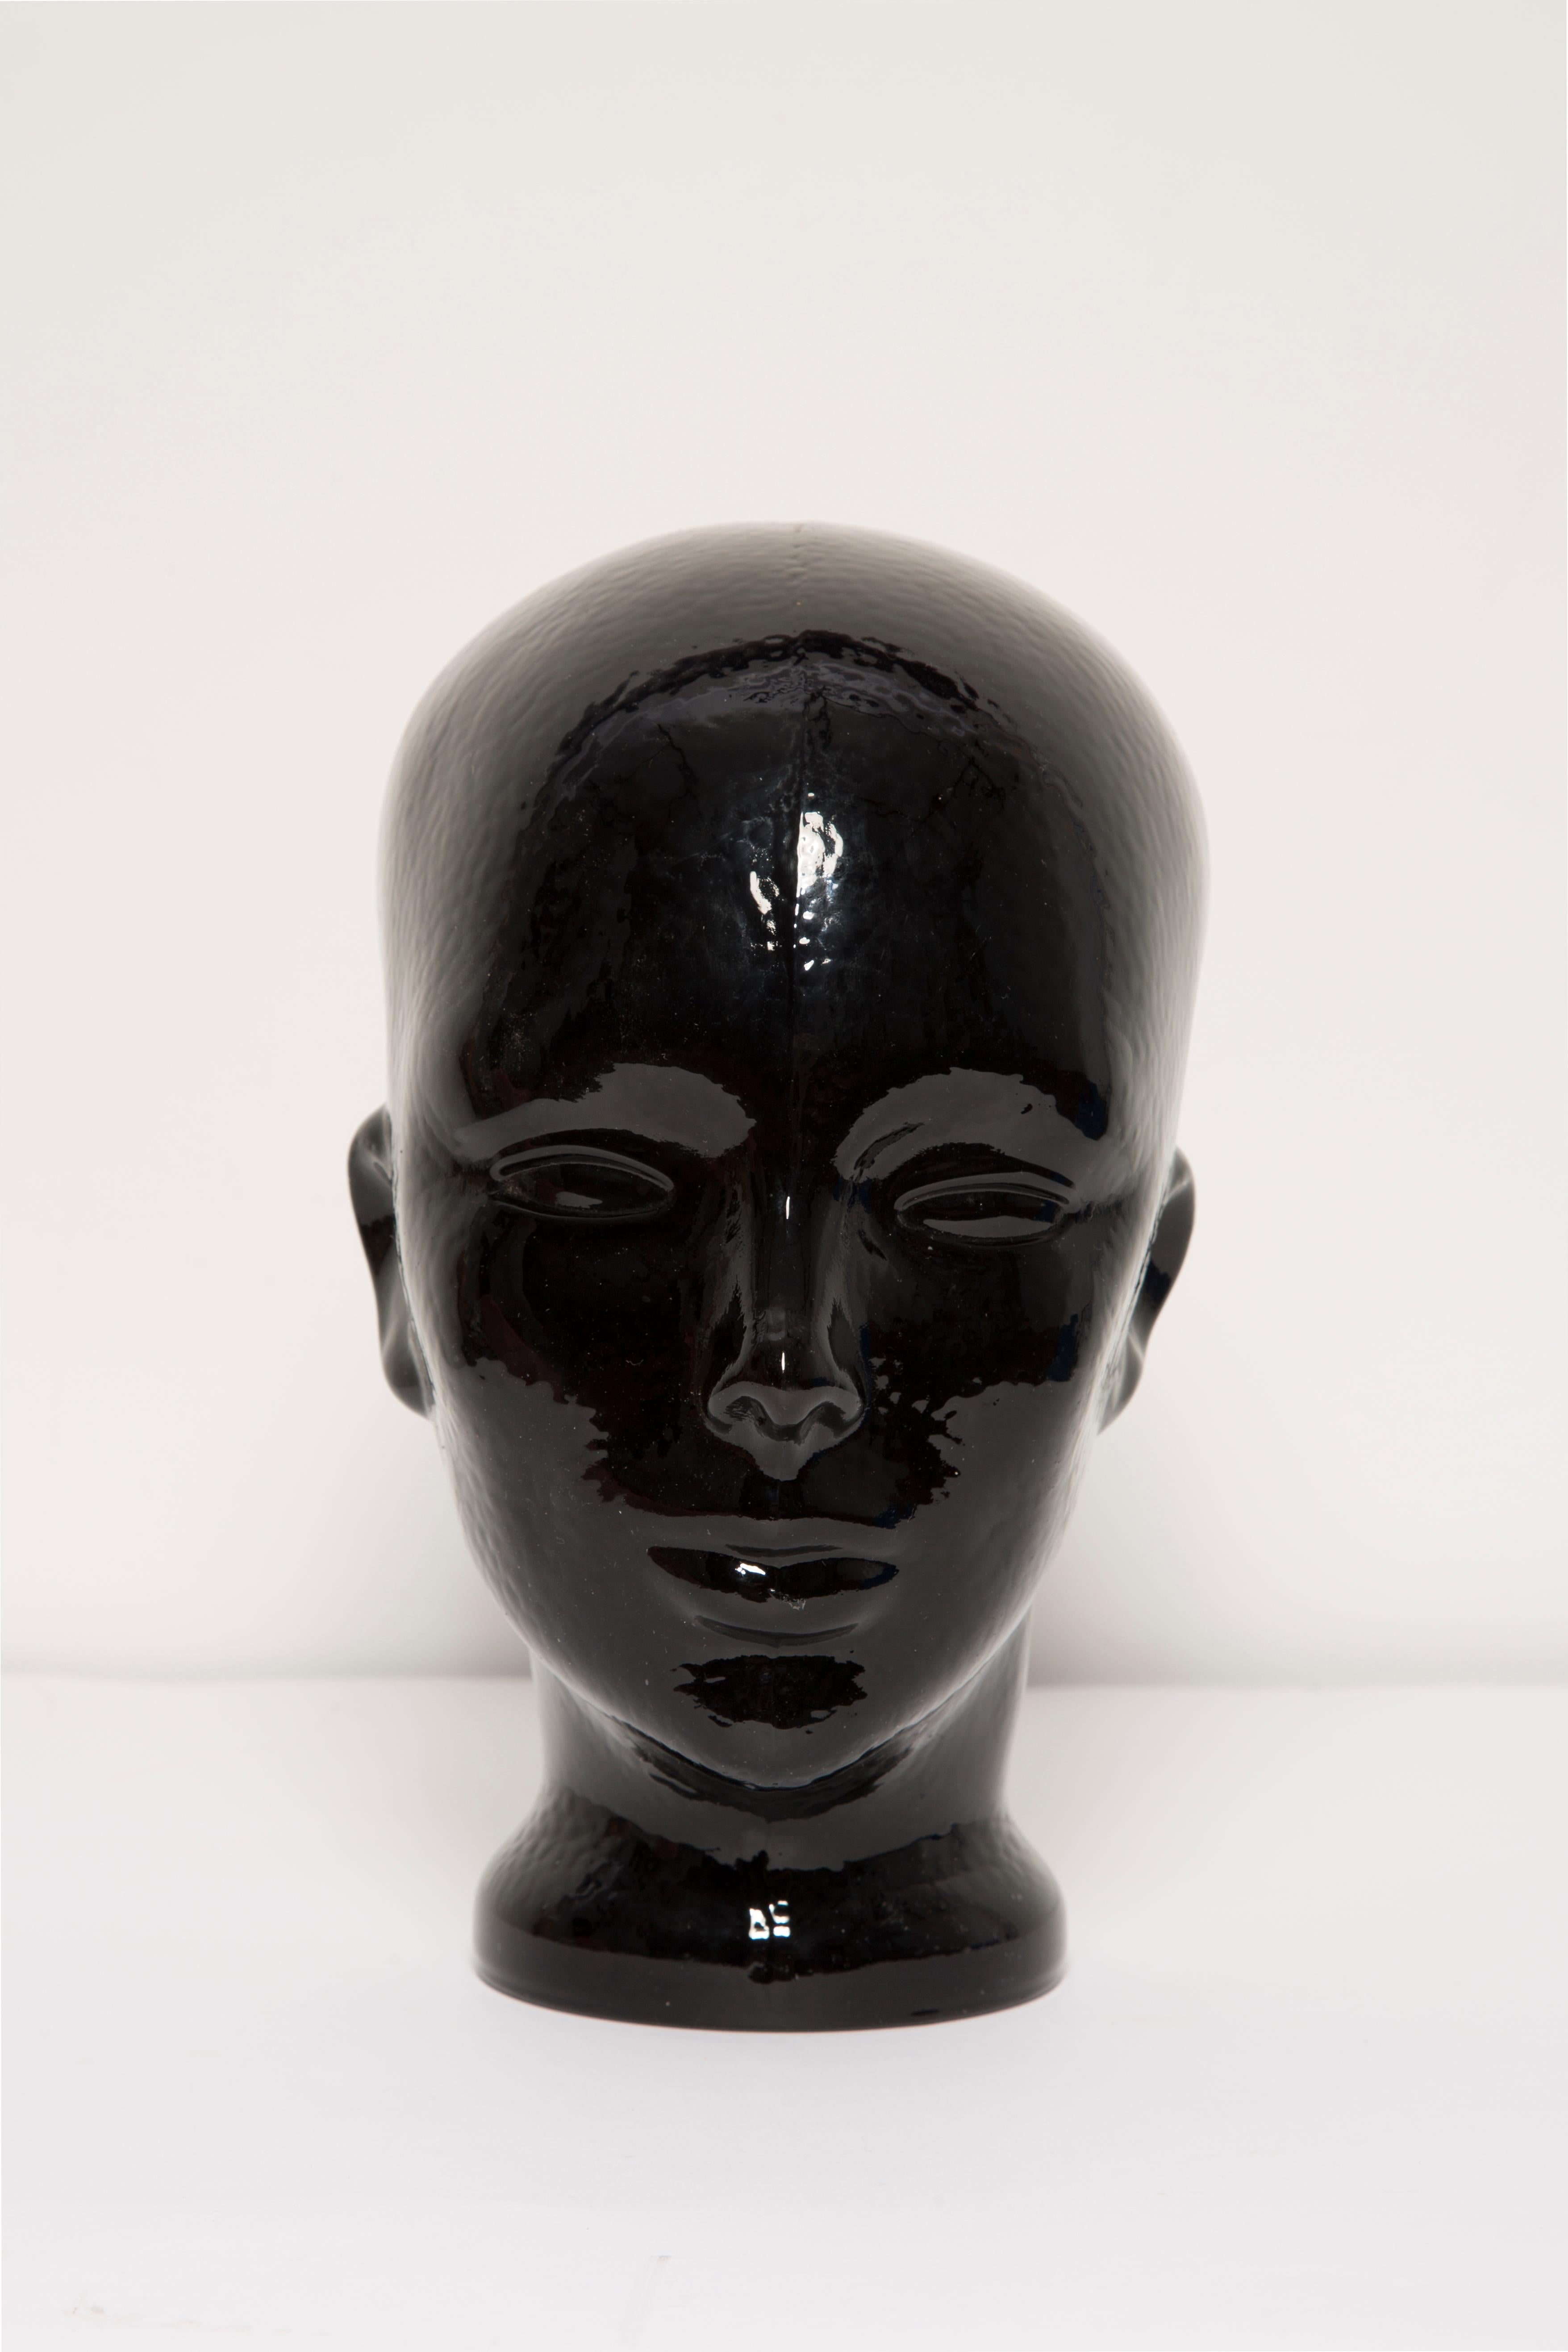 Life-size glass head in a deep black beautiful color. Produced in a German glassworks in the 1970s. Perfect condition. A perfect addition to the interior, photo prop, display or headphone stand.